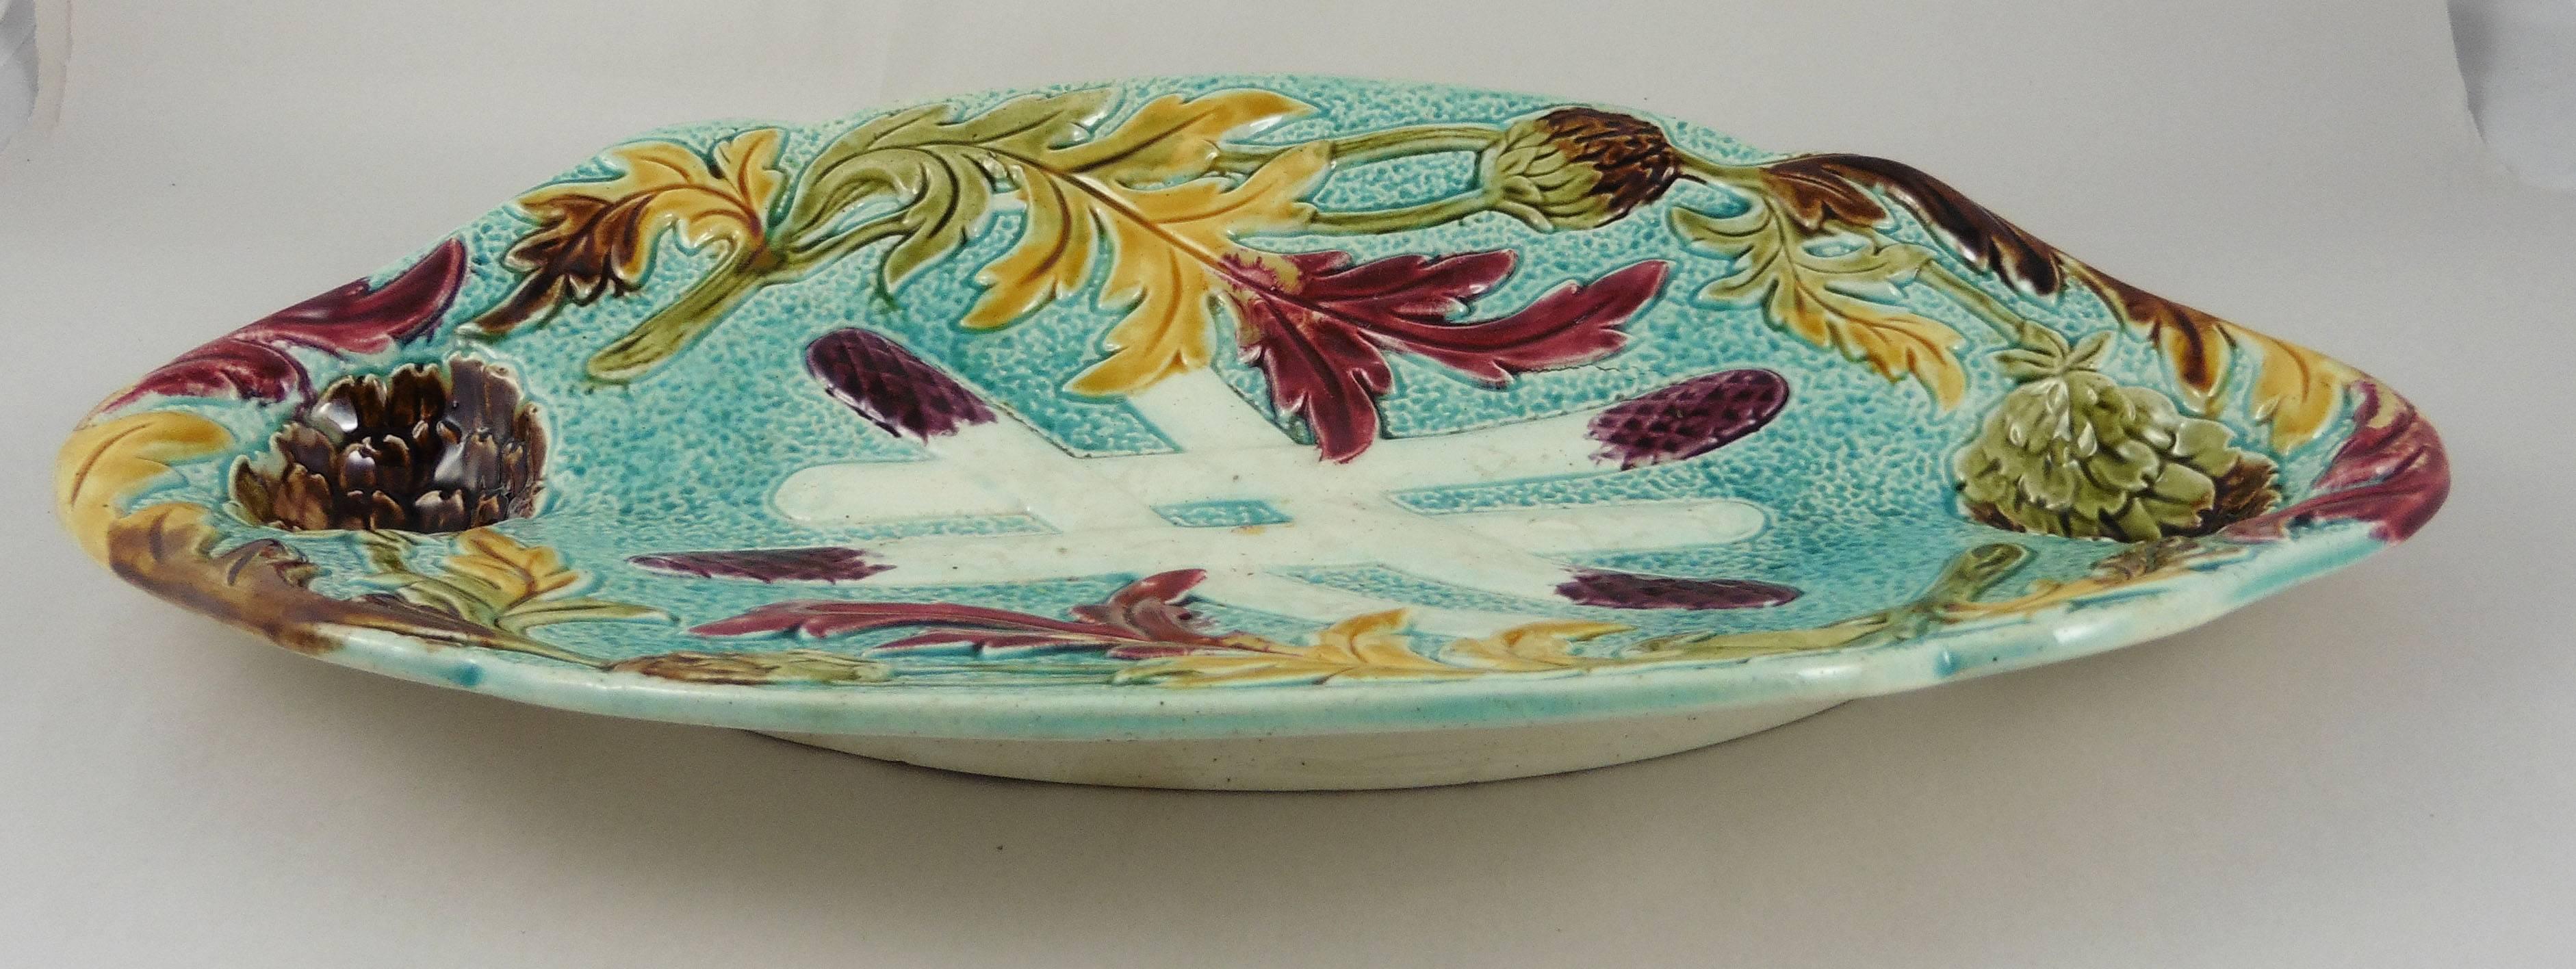 A very colorful Majolica asparagus and artichoke platter attributed to Orchies.
(North of France), circa 1880.
Every important French manufactures produced at the end of the 19th asparagus and artichoke sets.
  